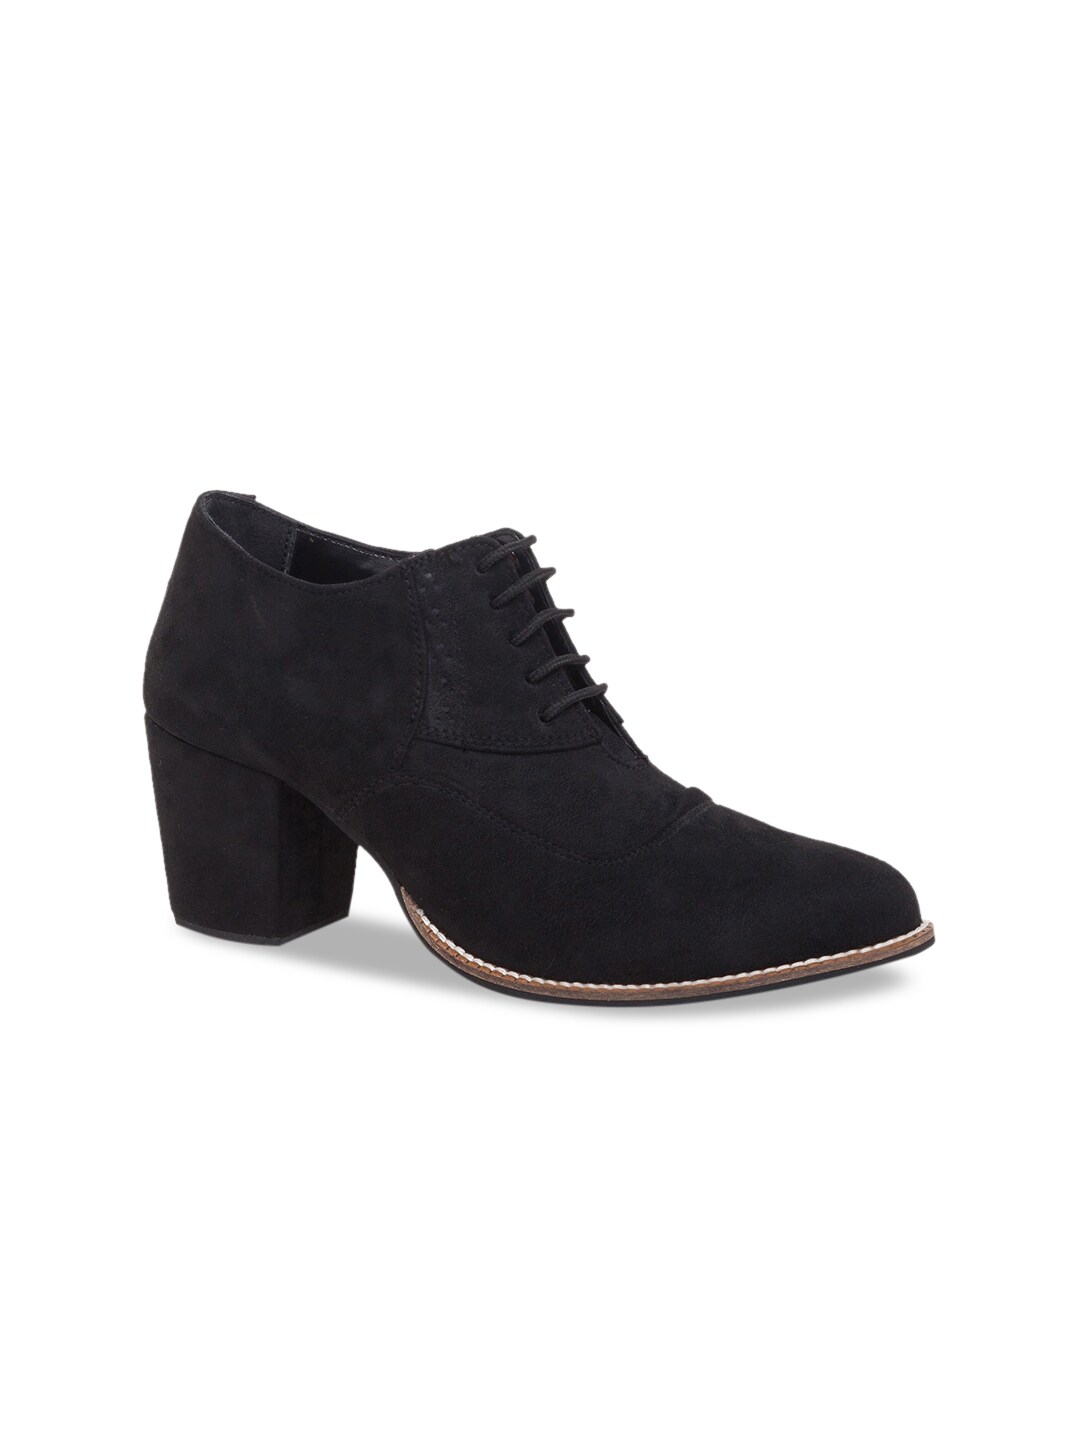 Sole To Soul Black Suede Block Heeled Boots Price in India